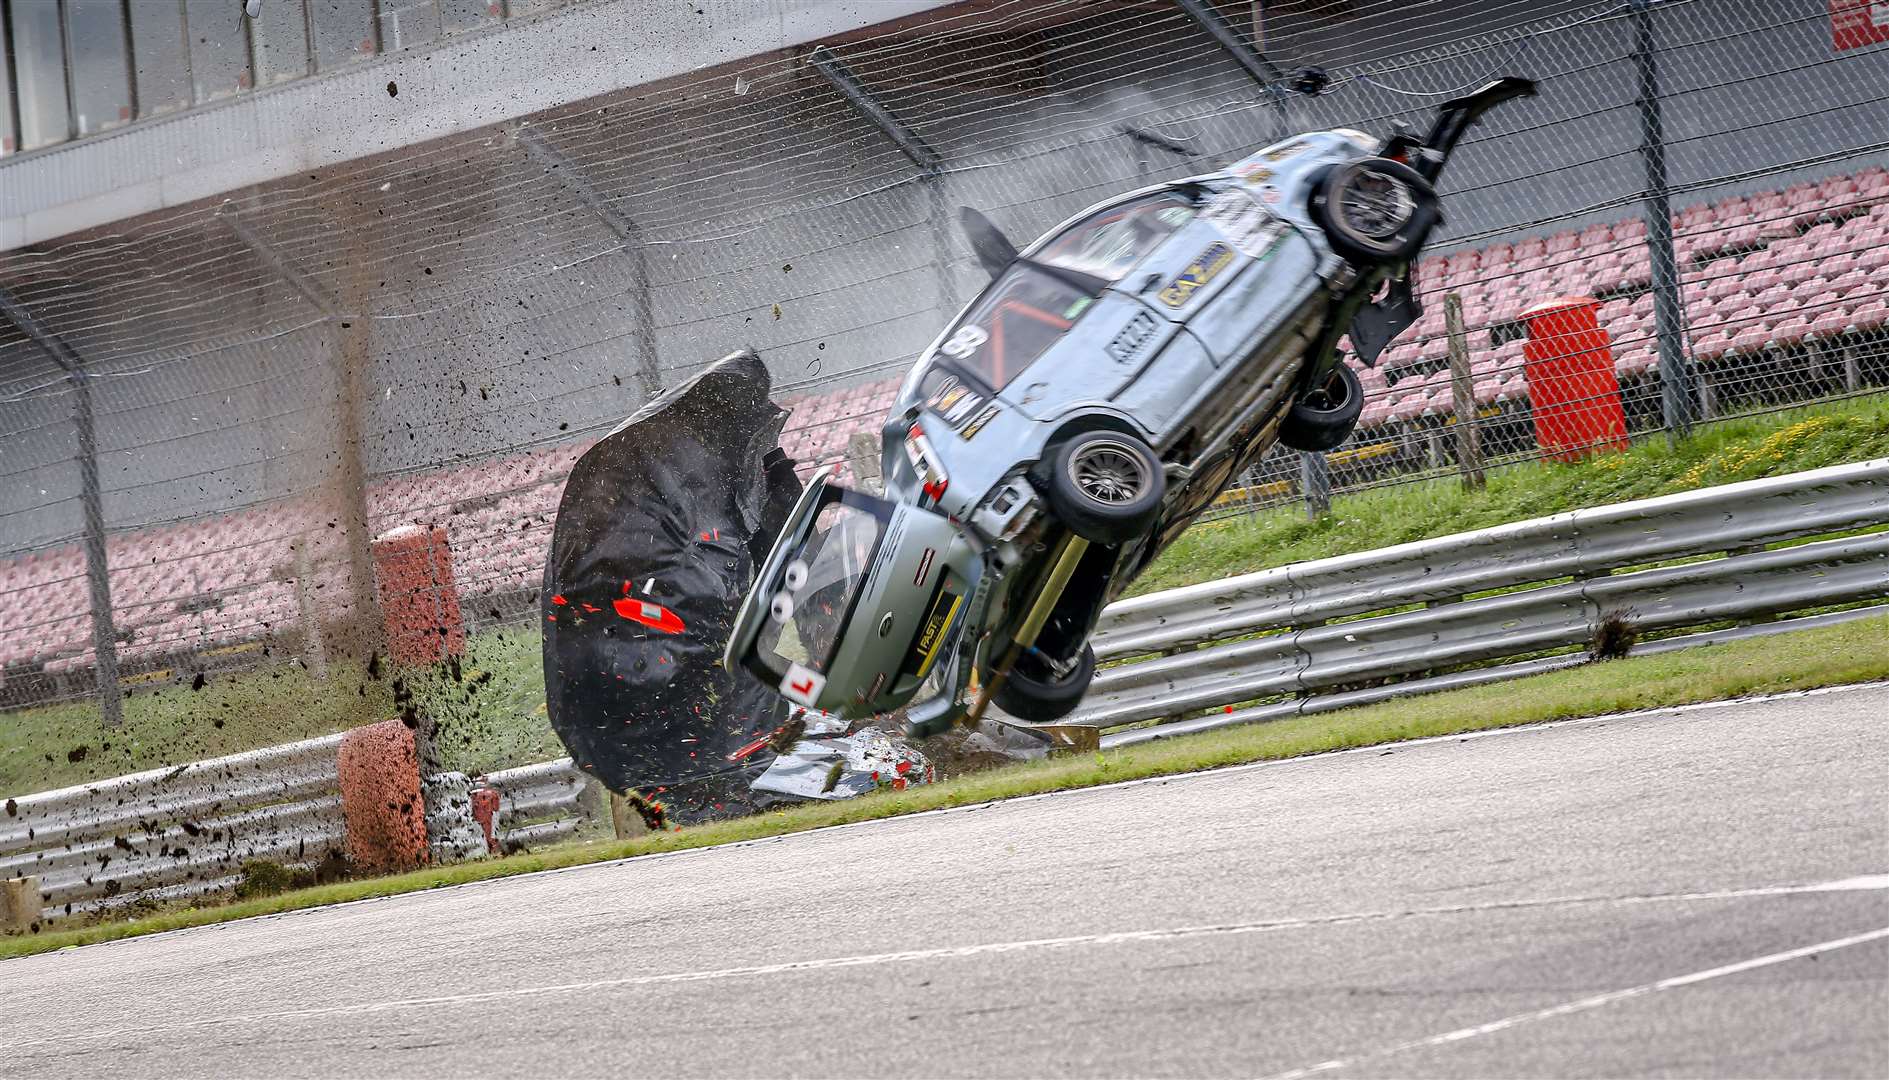 Car and track safety measures were praised in the aftermath. Photo: Stephen Jackman/Eat My Pixels